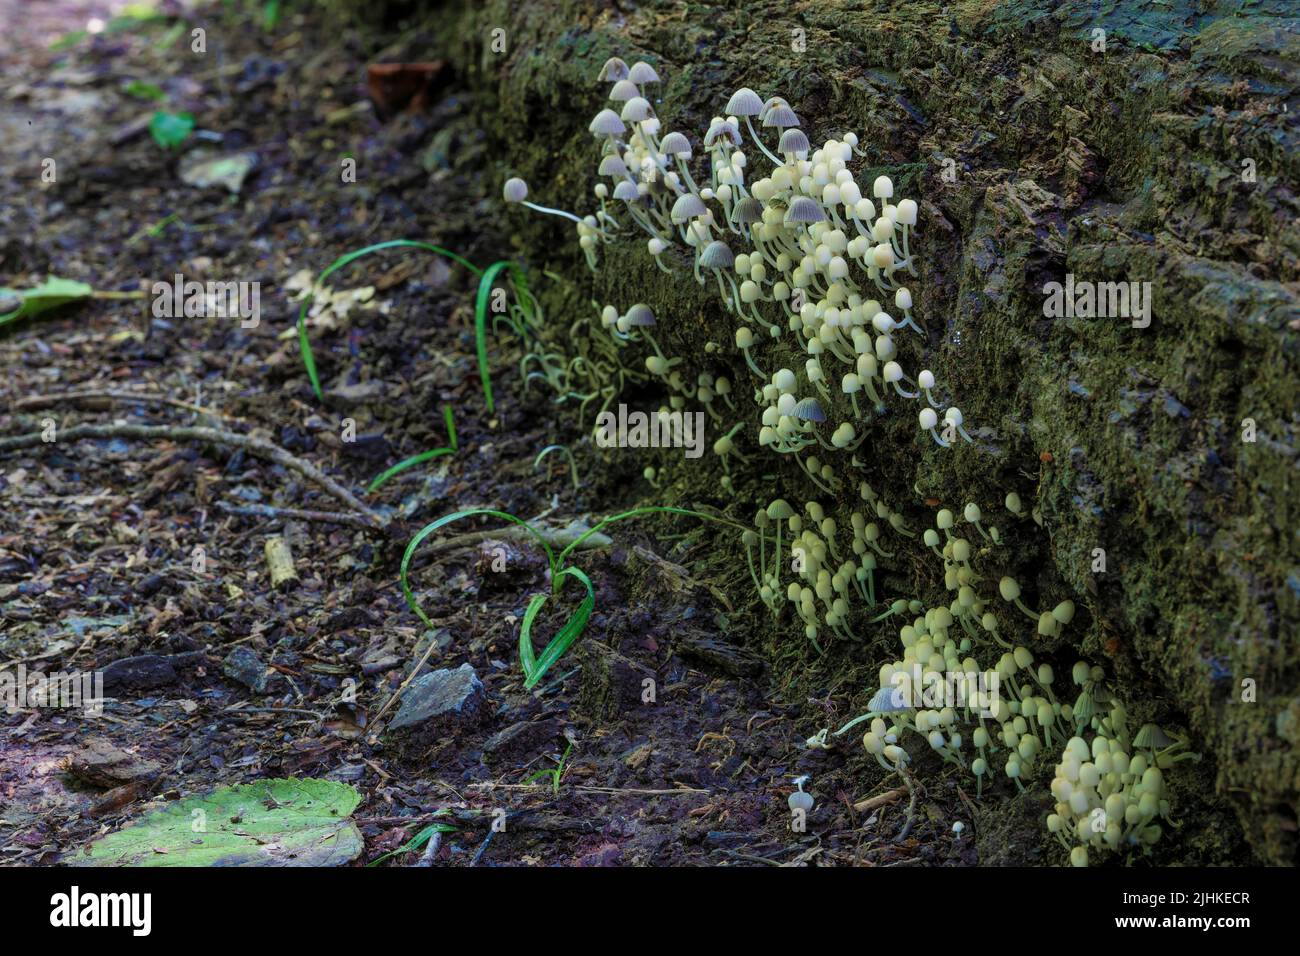 Close up of fungi, known as frosty bonnet growing on a down tree in a forest along side a hiking trail. Stock Photo